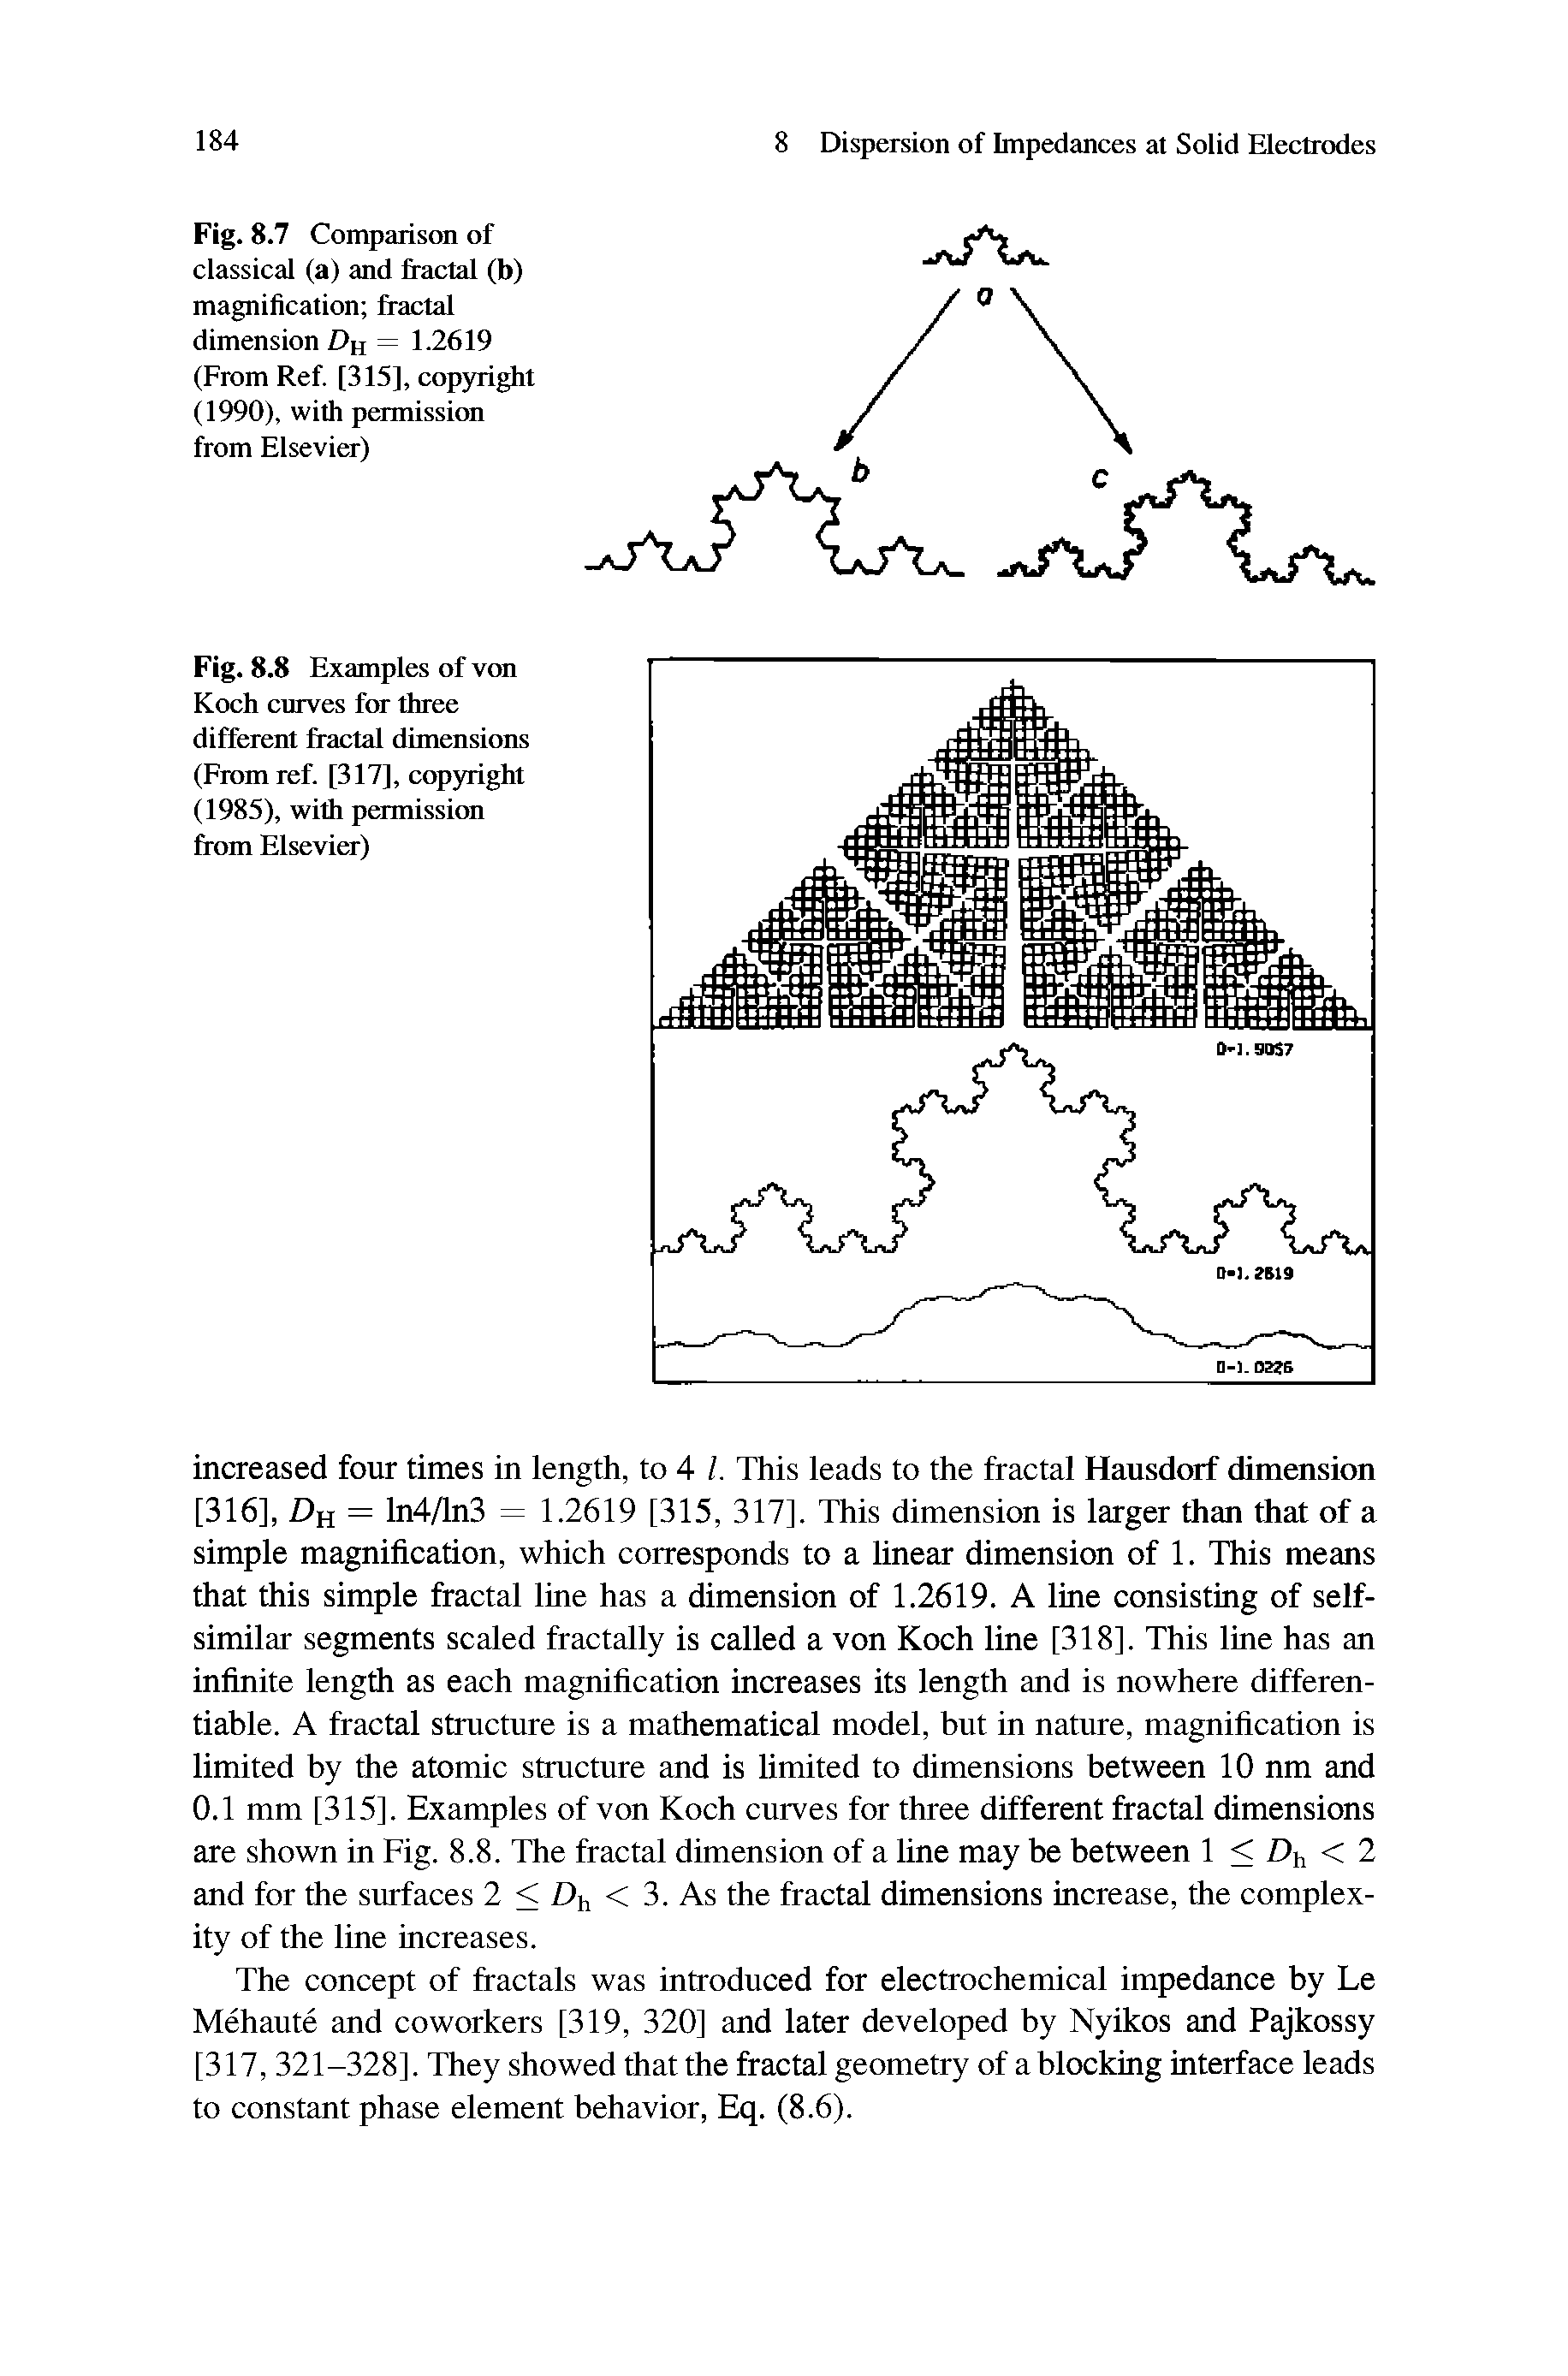 Fig. 8.8 Examples of von Koch curves for three different fractal dimensions (From ref. [317], copyright (1985), with permission from Elsevier)...